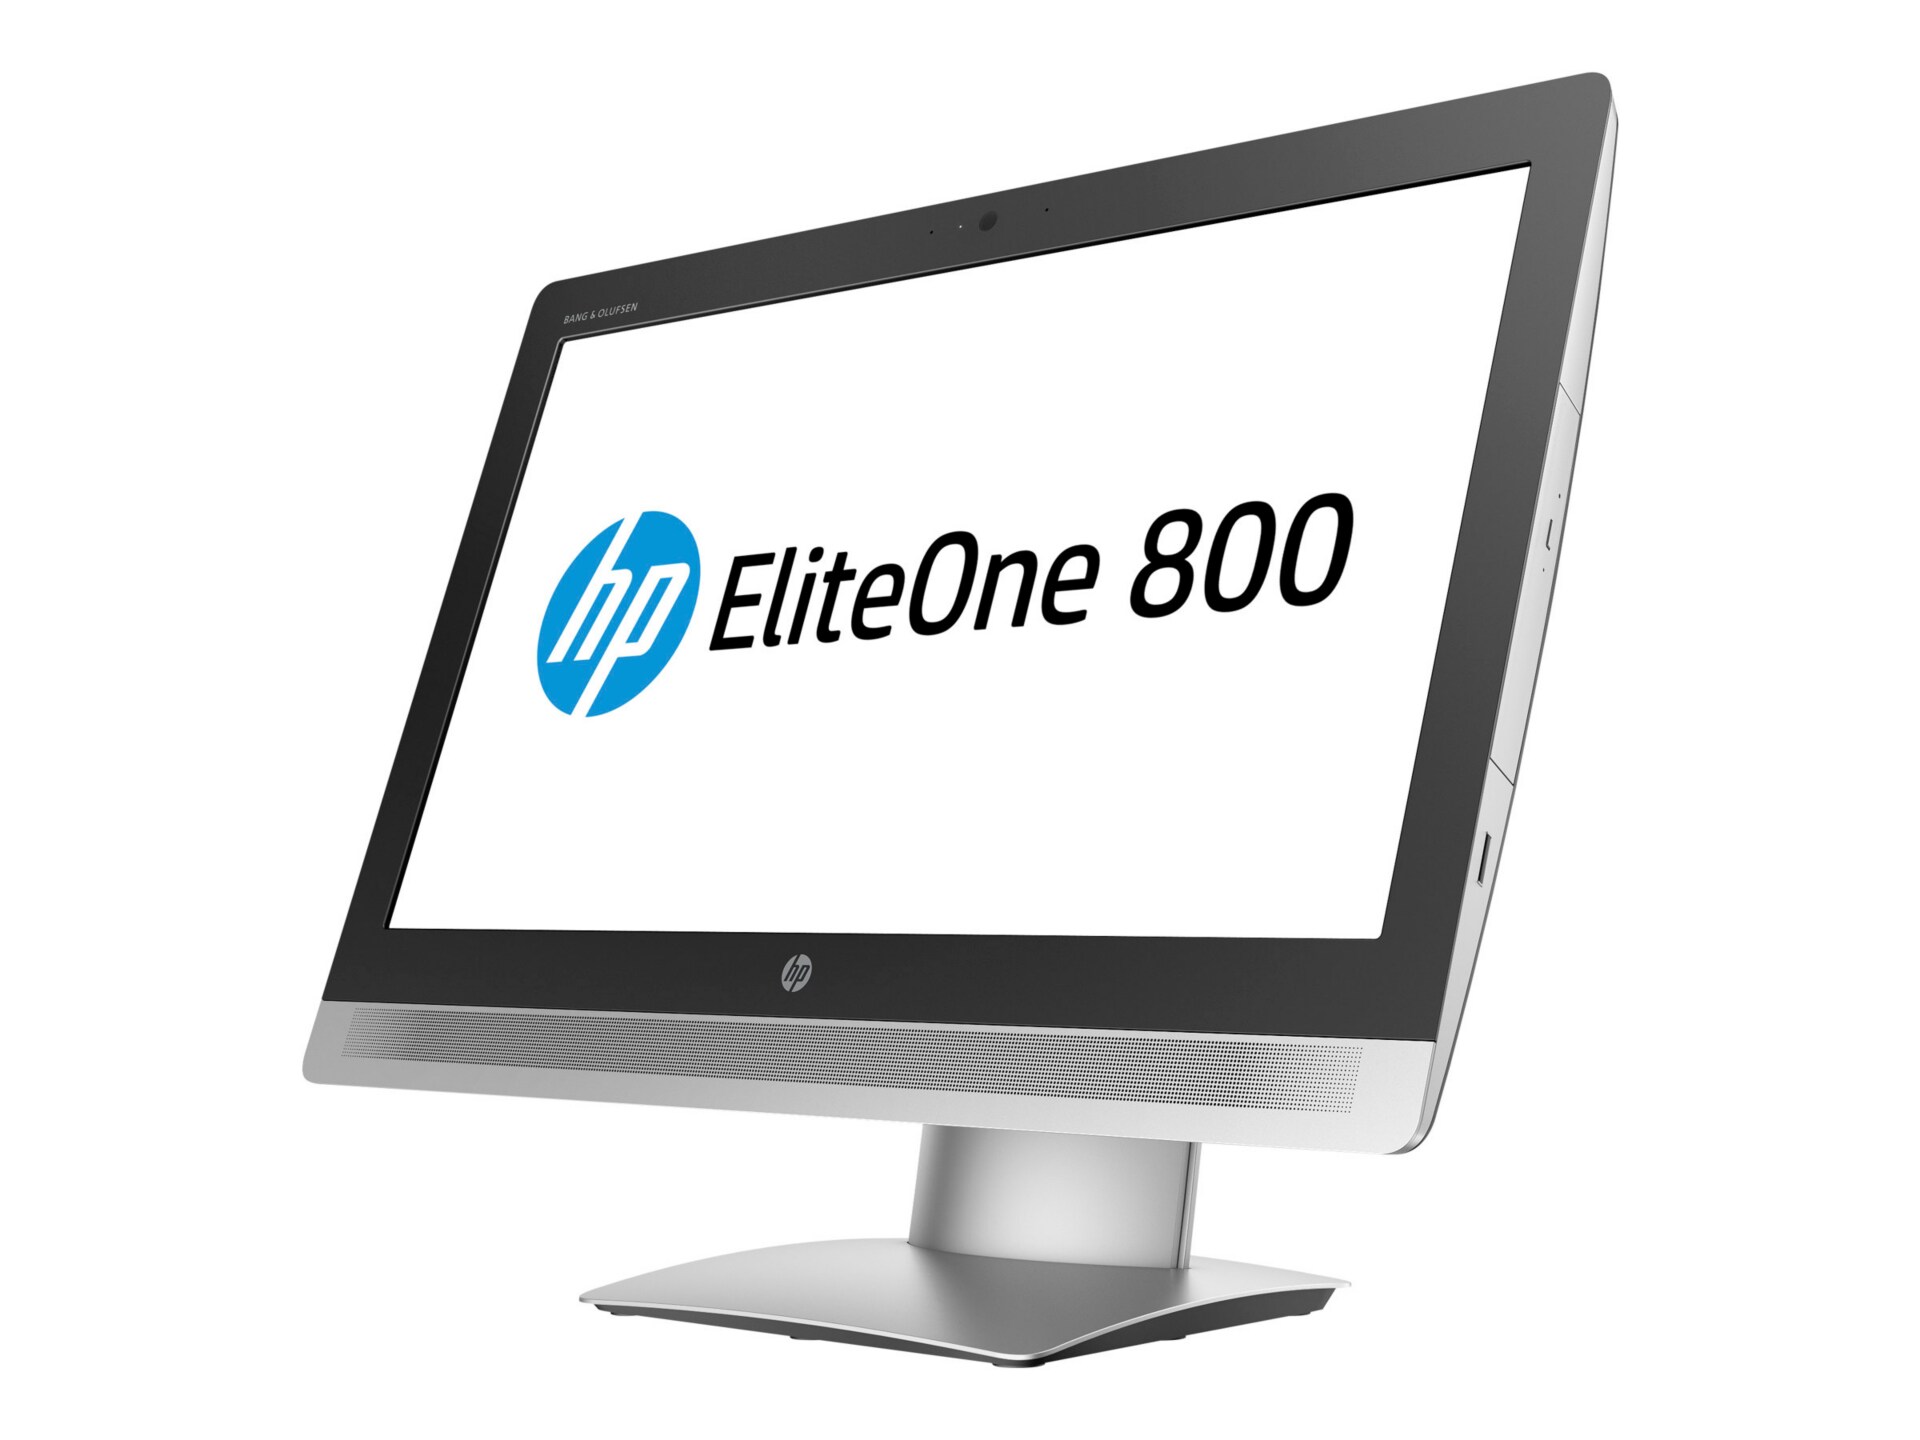 HP EliteOne 800 G2 - all-in-one - Core i5 6500 3.2 GHz - 4 GB - 500 GB - LED 23" - US